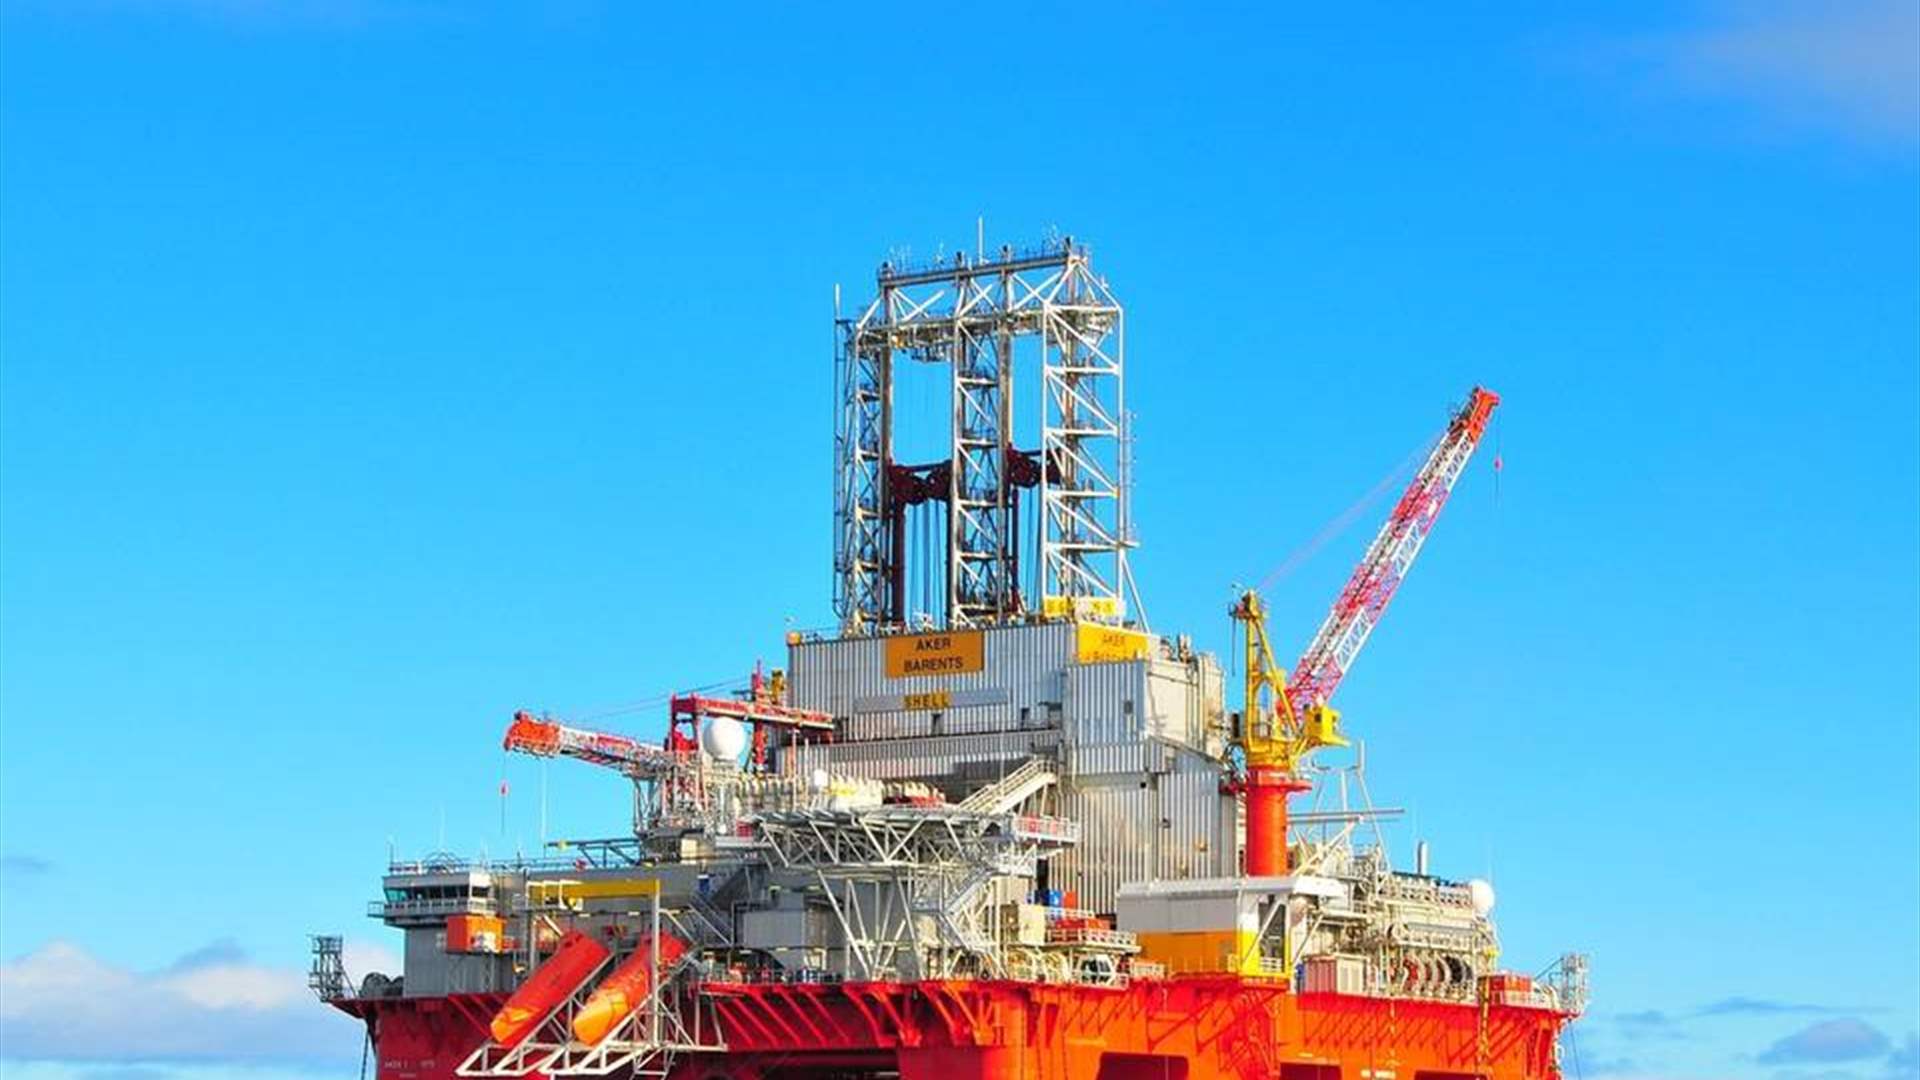 TotalEnergies announces arrival of drilling platform, helicopter to Lebanon for drilling operations in Block 9